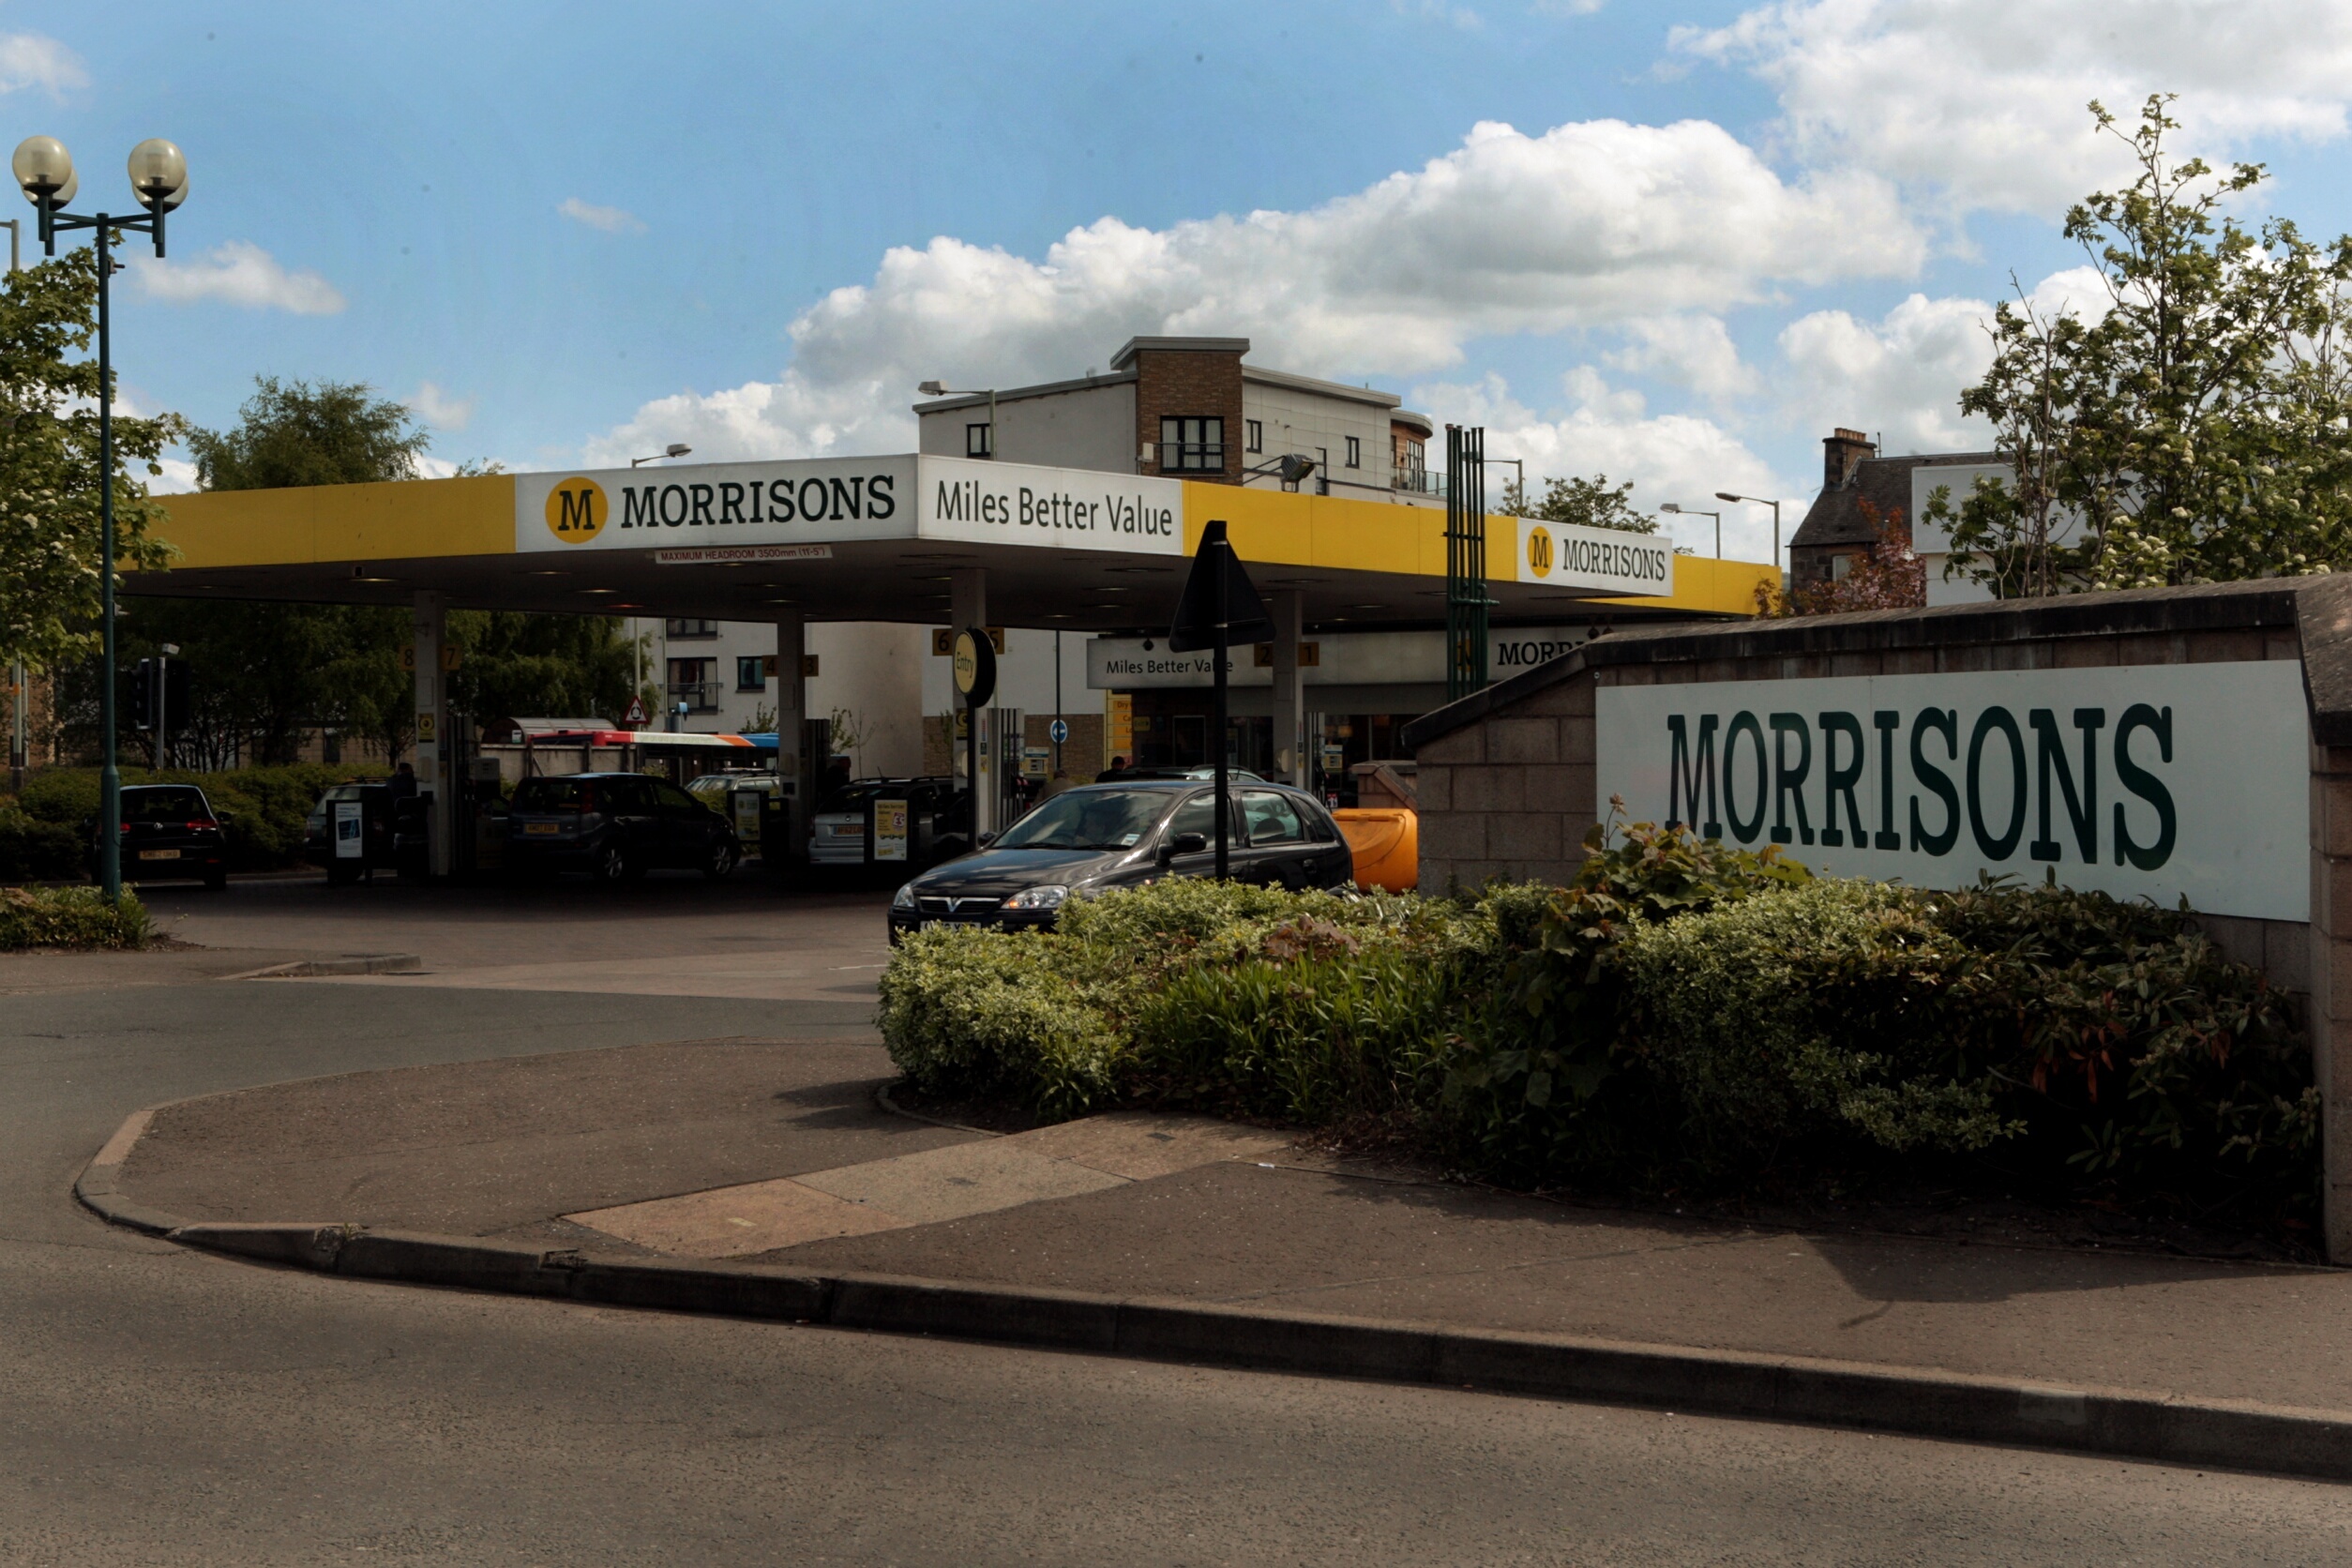 The thief stole the handbag at the Morrison's supermarket car park in Perth.